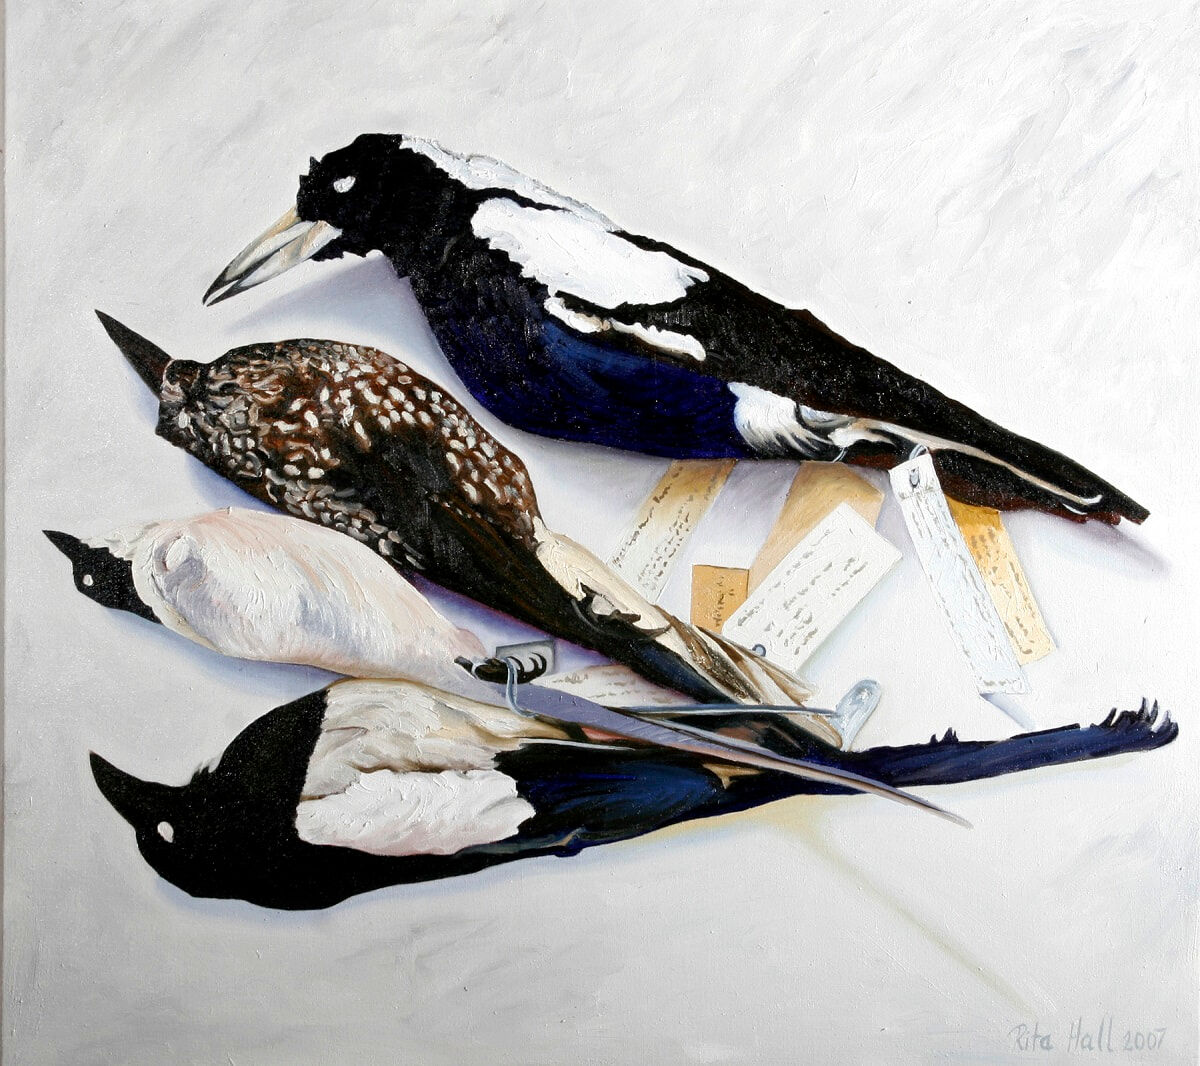 Three Magpies And Bird 2007 Oil on linen 77x84cm